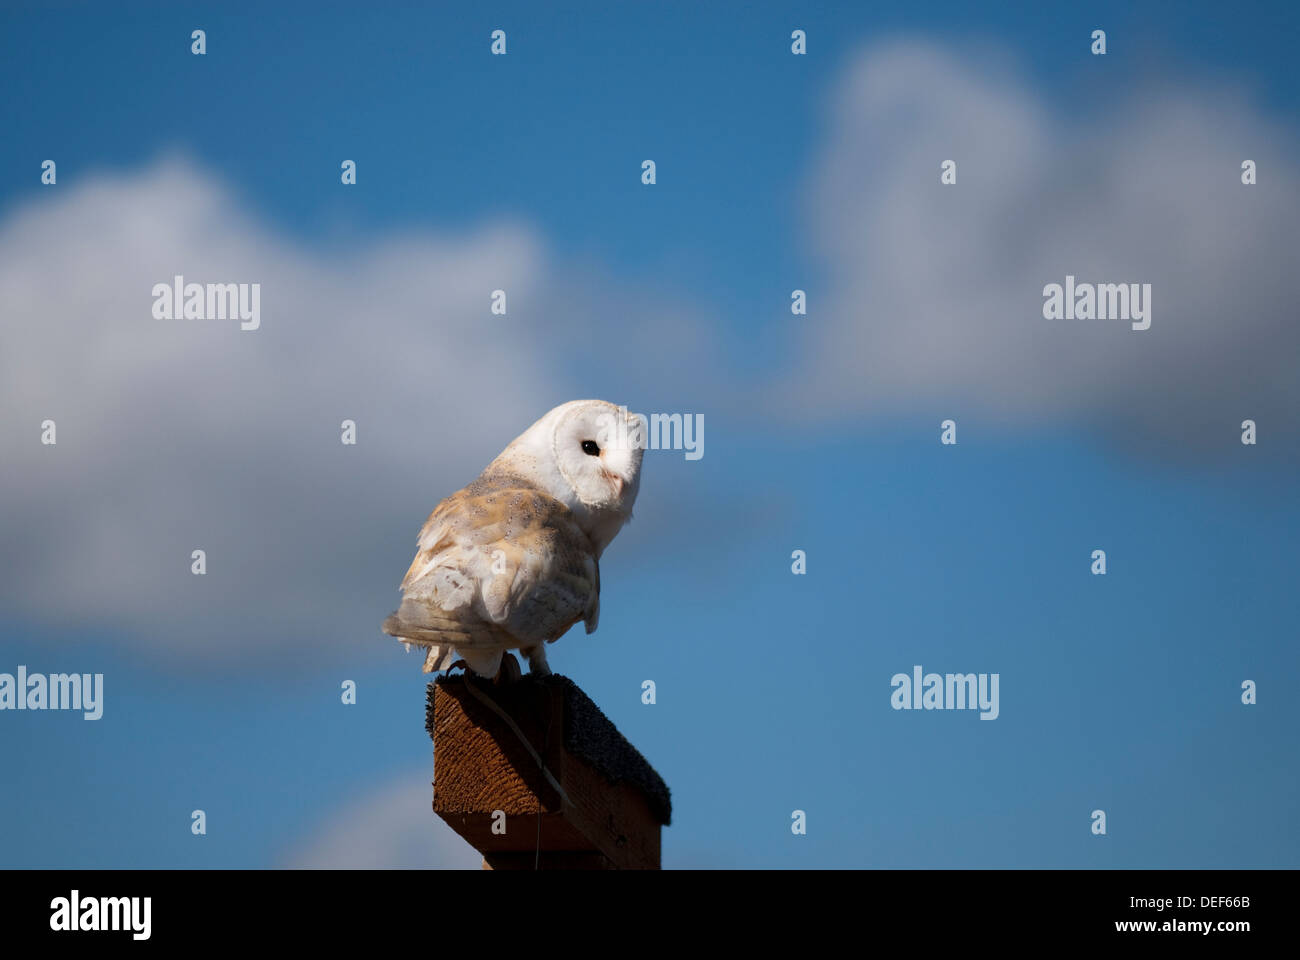 Perched Barn owl at a birds of prey show Stock Photo